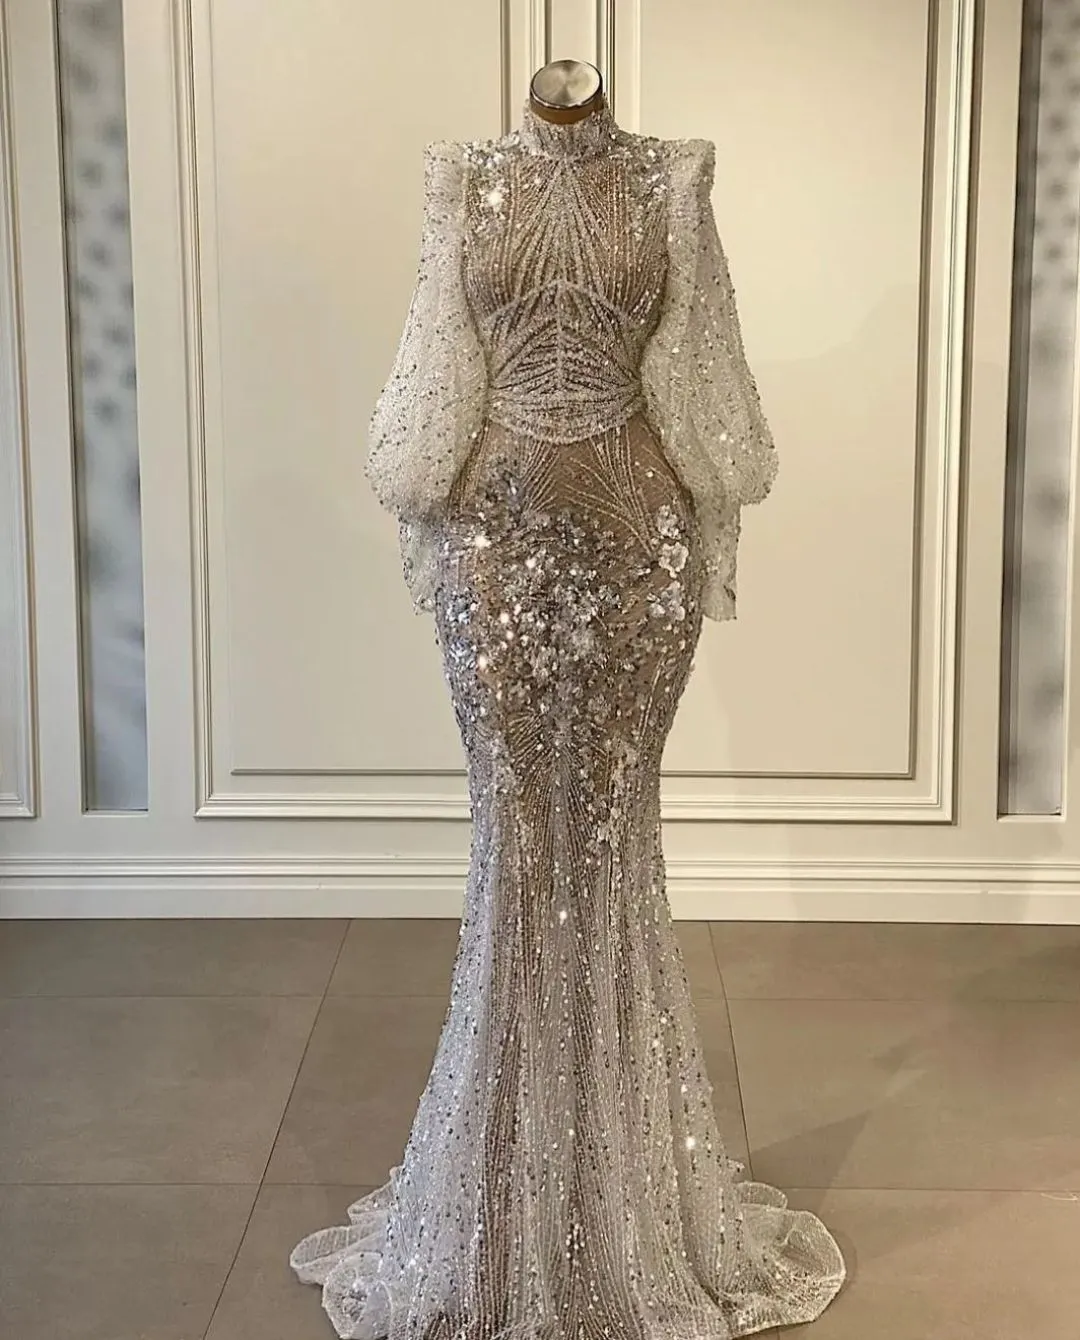 Luxury Mermaid Sparkly Prom Dresses 2022 With Long Sleeves, High Neck,  Diamonds, Sequins, Beading, 3D Lace, Hollow Design, Floor Length, Zipper  Closure, Customizable Plus Size Evening Gown. From Kuaileju, $292.17